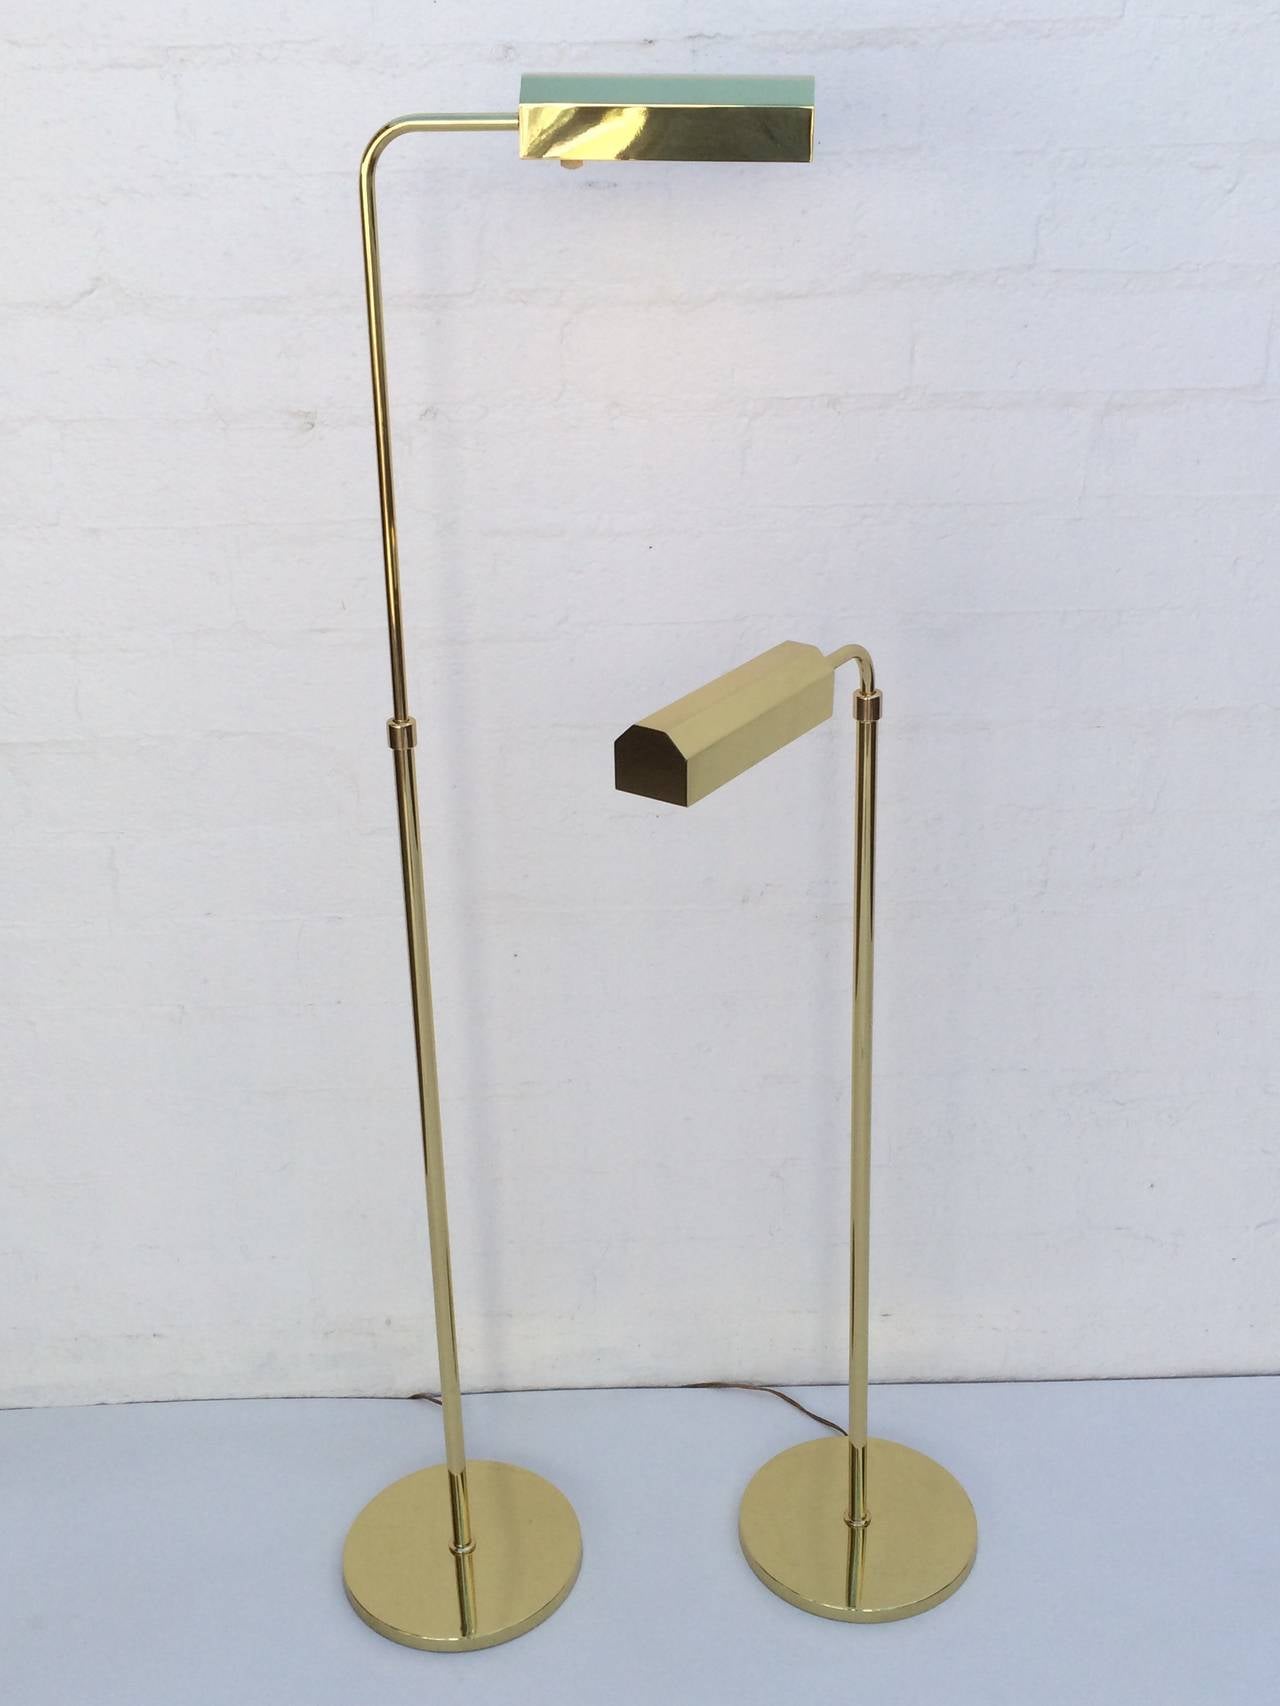 A pair of adjustable floor lamps made in the 1970s.
Newly professionally polished brass.
Newly rewired.
These lamps have built-in dimmers. 

Measures: 57